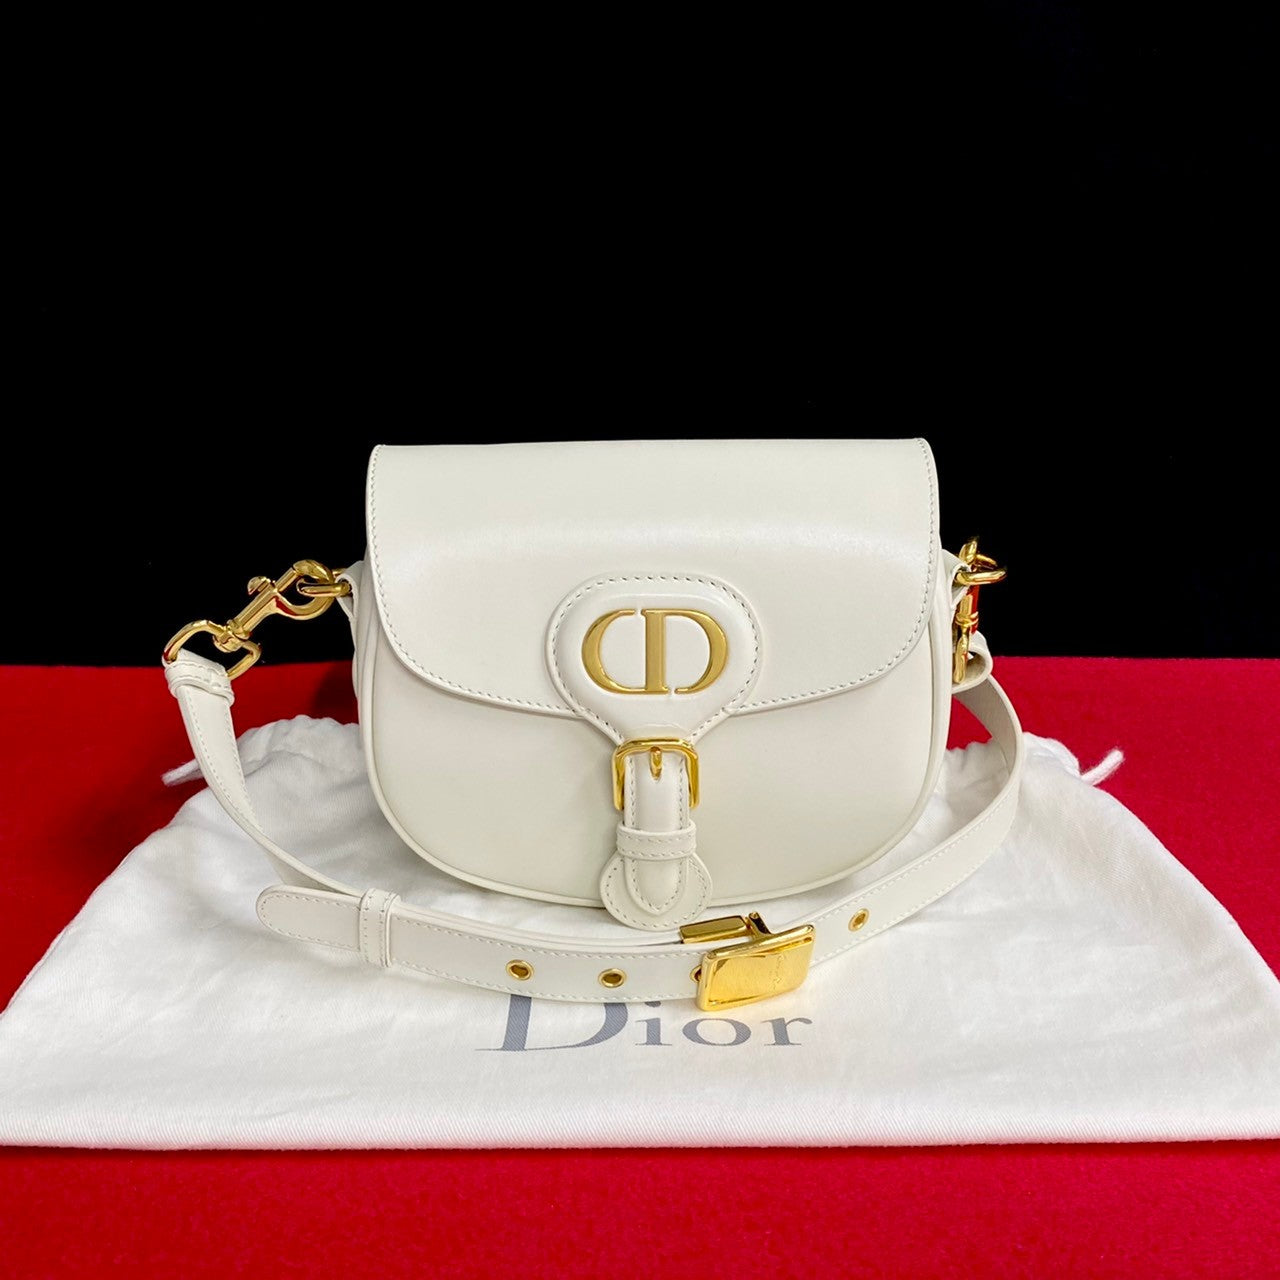 Dior Leather Bobby Bag  Leather Crossbody Bag in Excellent condition